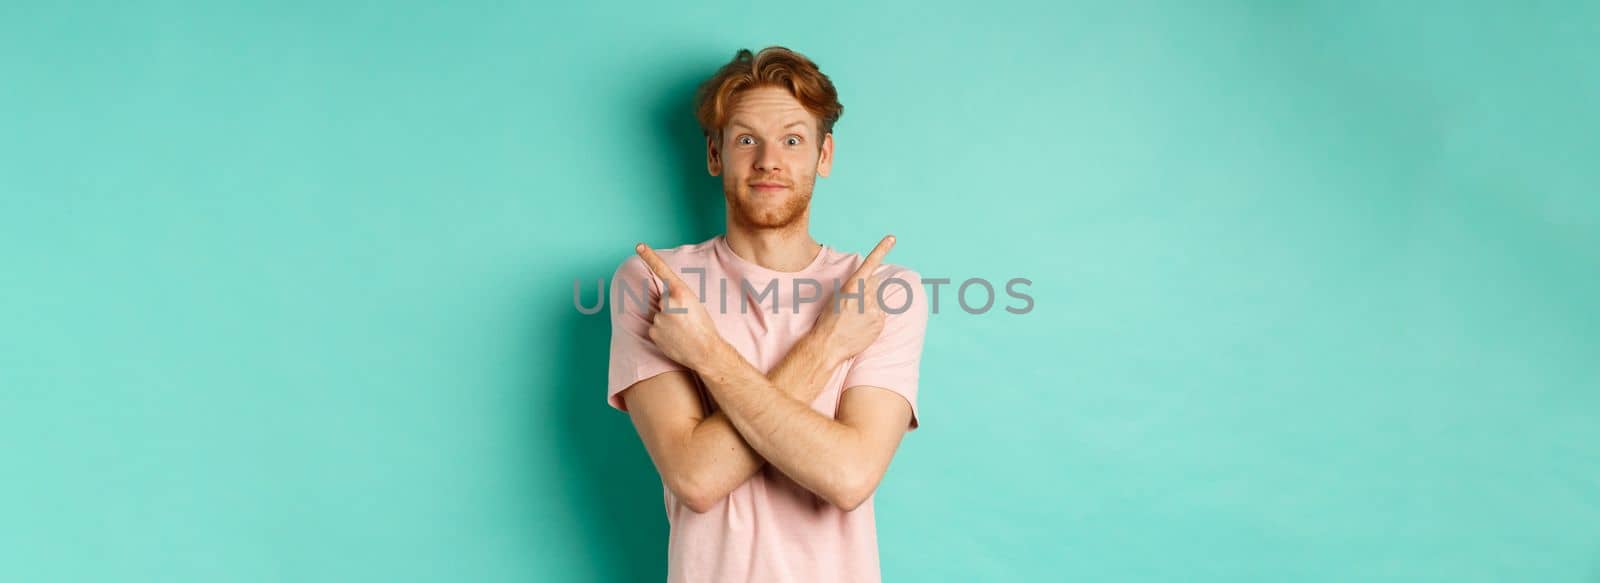 Attractive indecisive man in t-shirt cross hands and pointing sideways, showing two choices, need help with decision, standing over turquoise background.